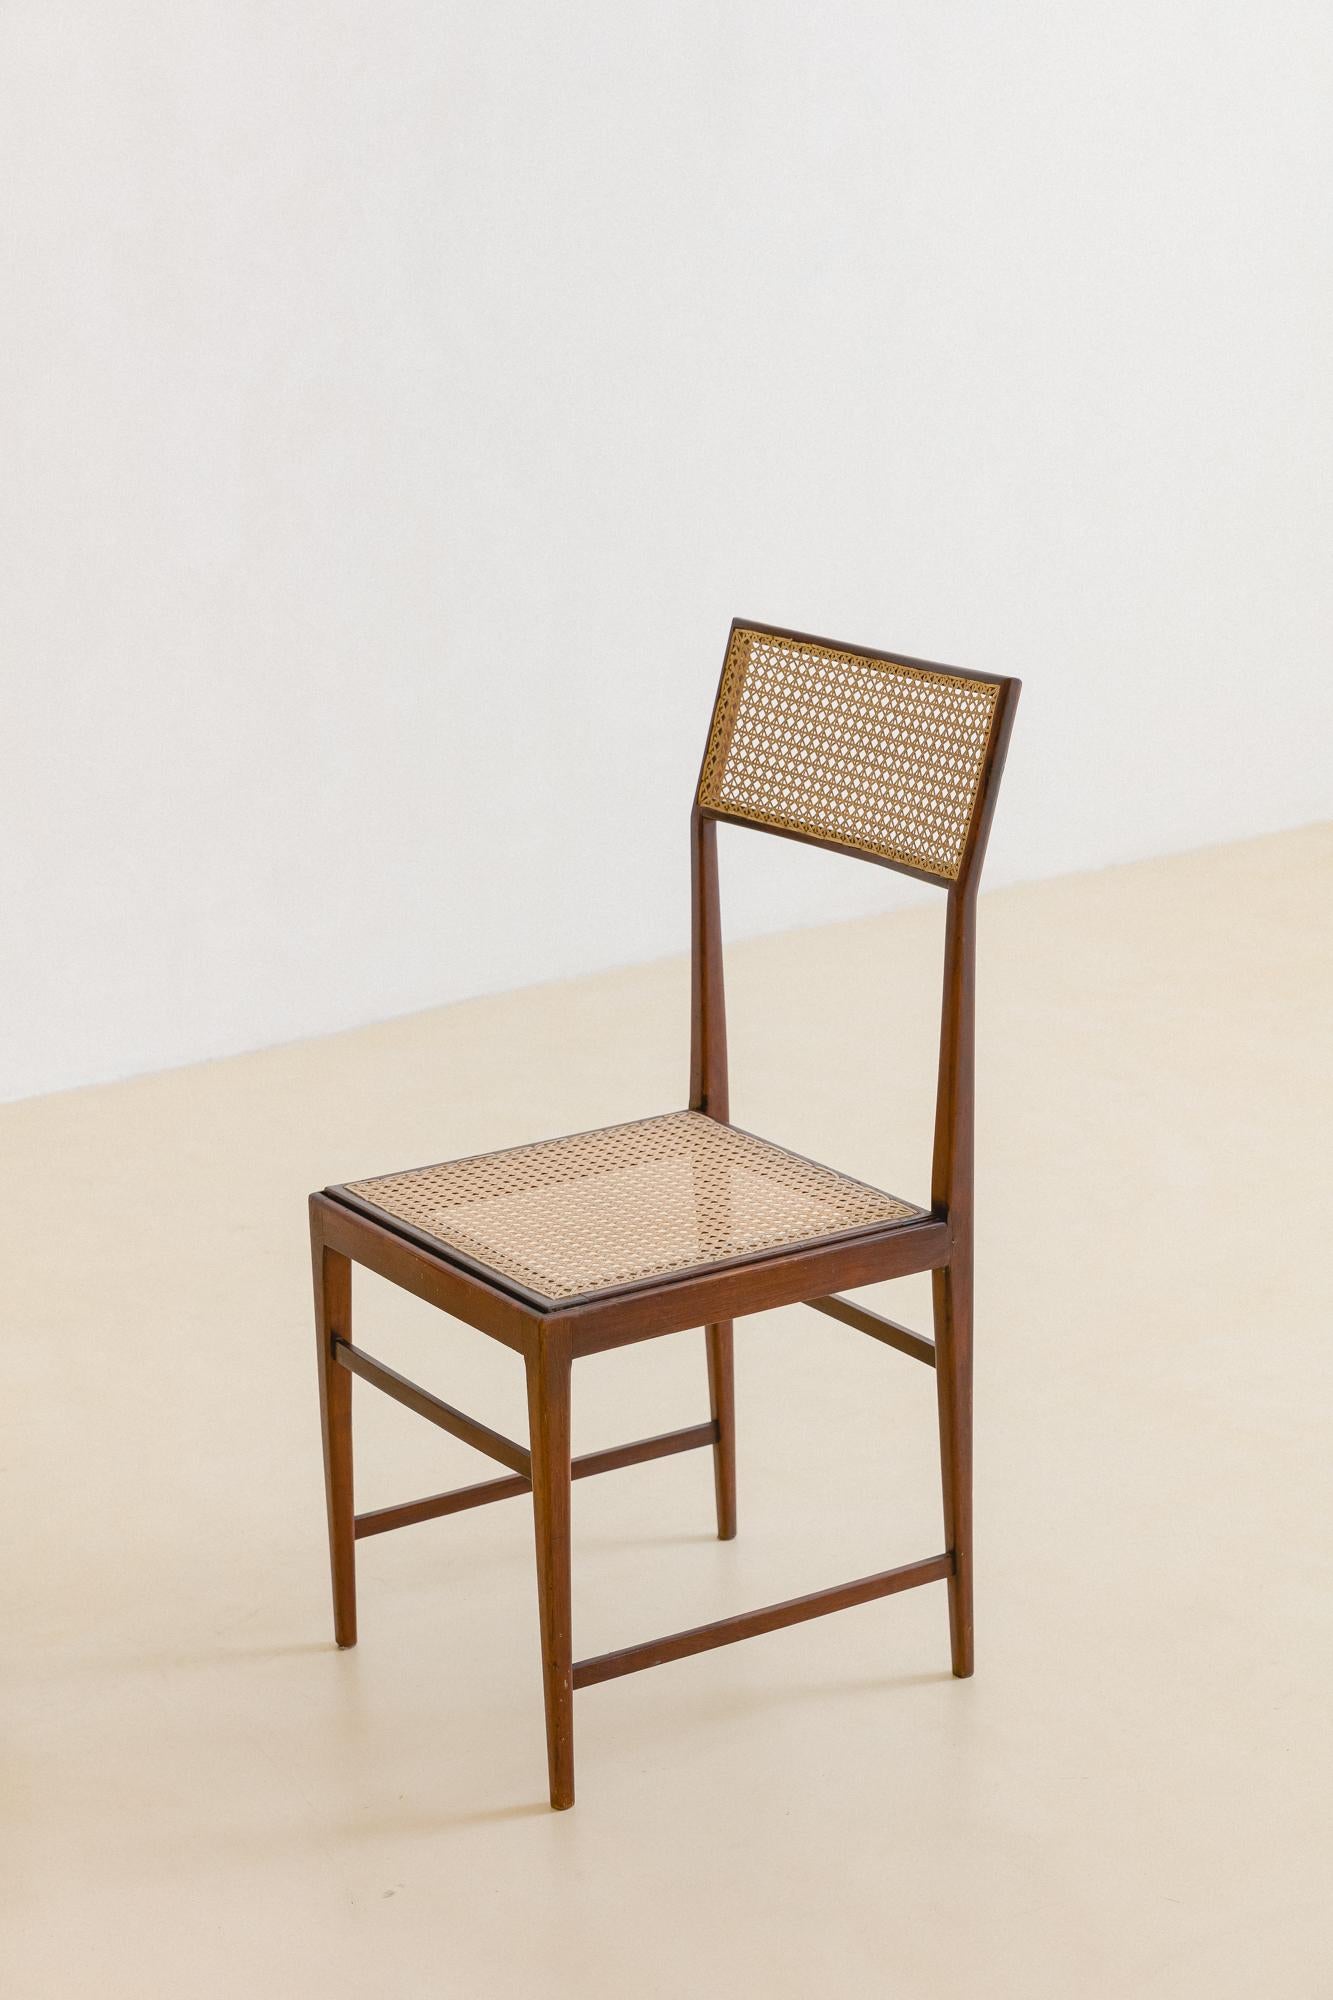 These exquisitely crafted dining chairs designed in the 1950s by Joaquim Tenreiro (1906-1992), known as the “father” of Brazilian modernism, are composed of solid Rosewood structures, with seats and angled backrests in cane.

The artist and